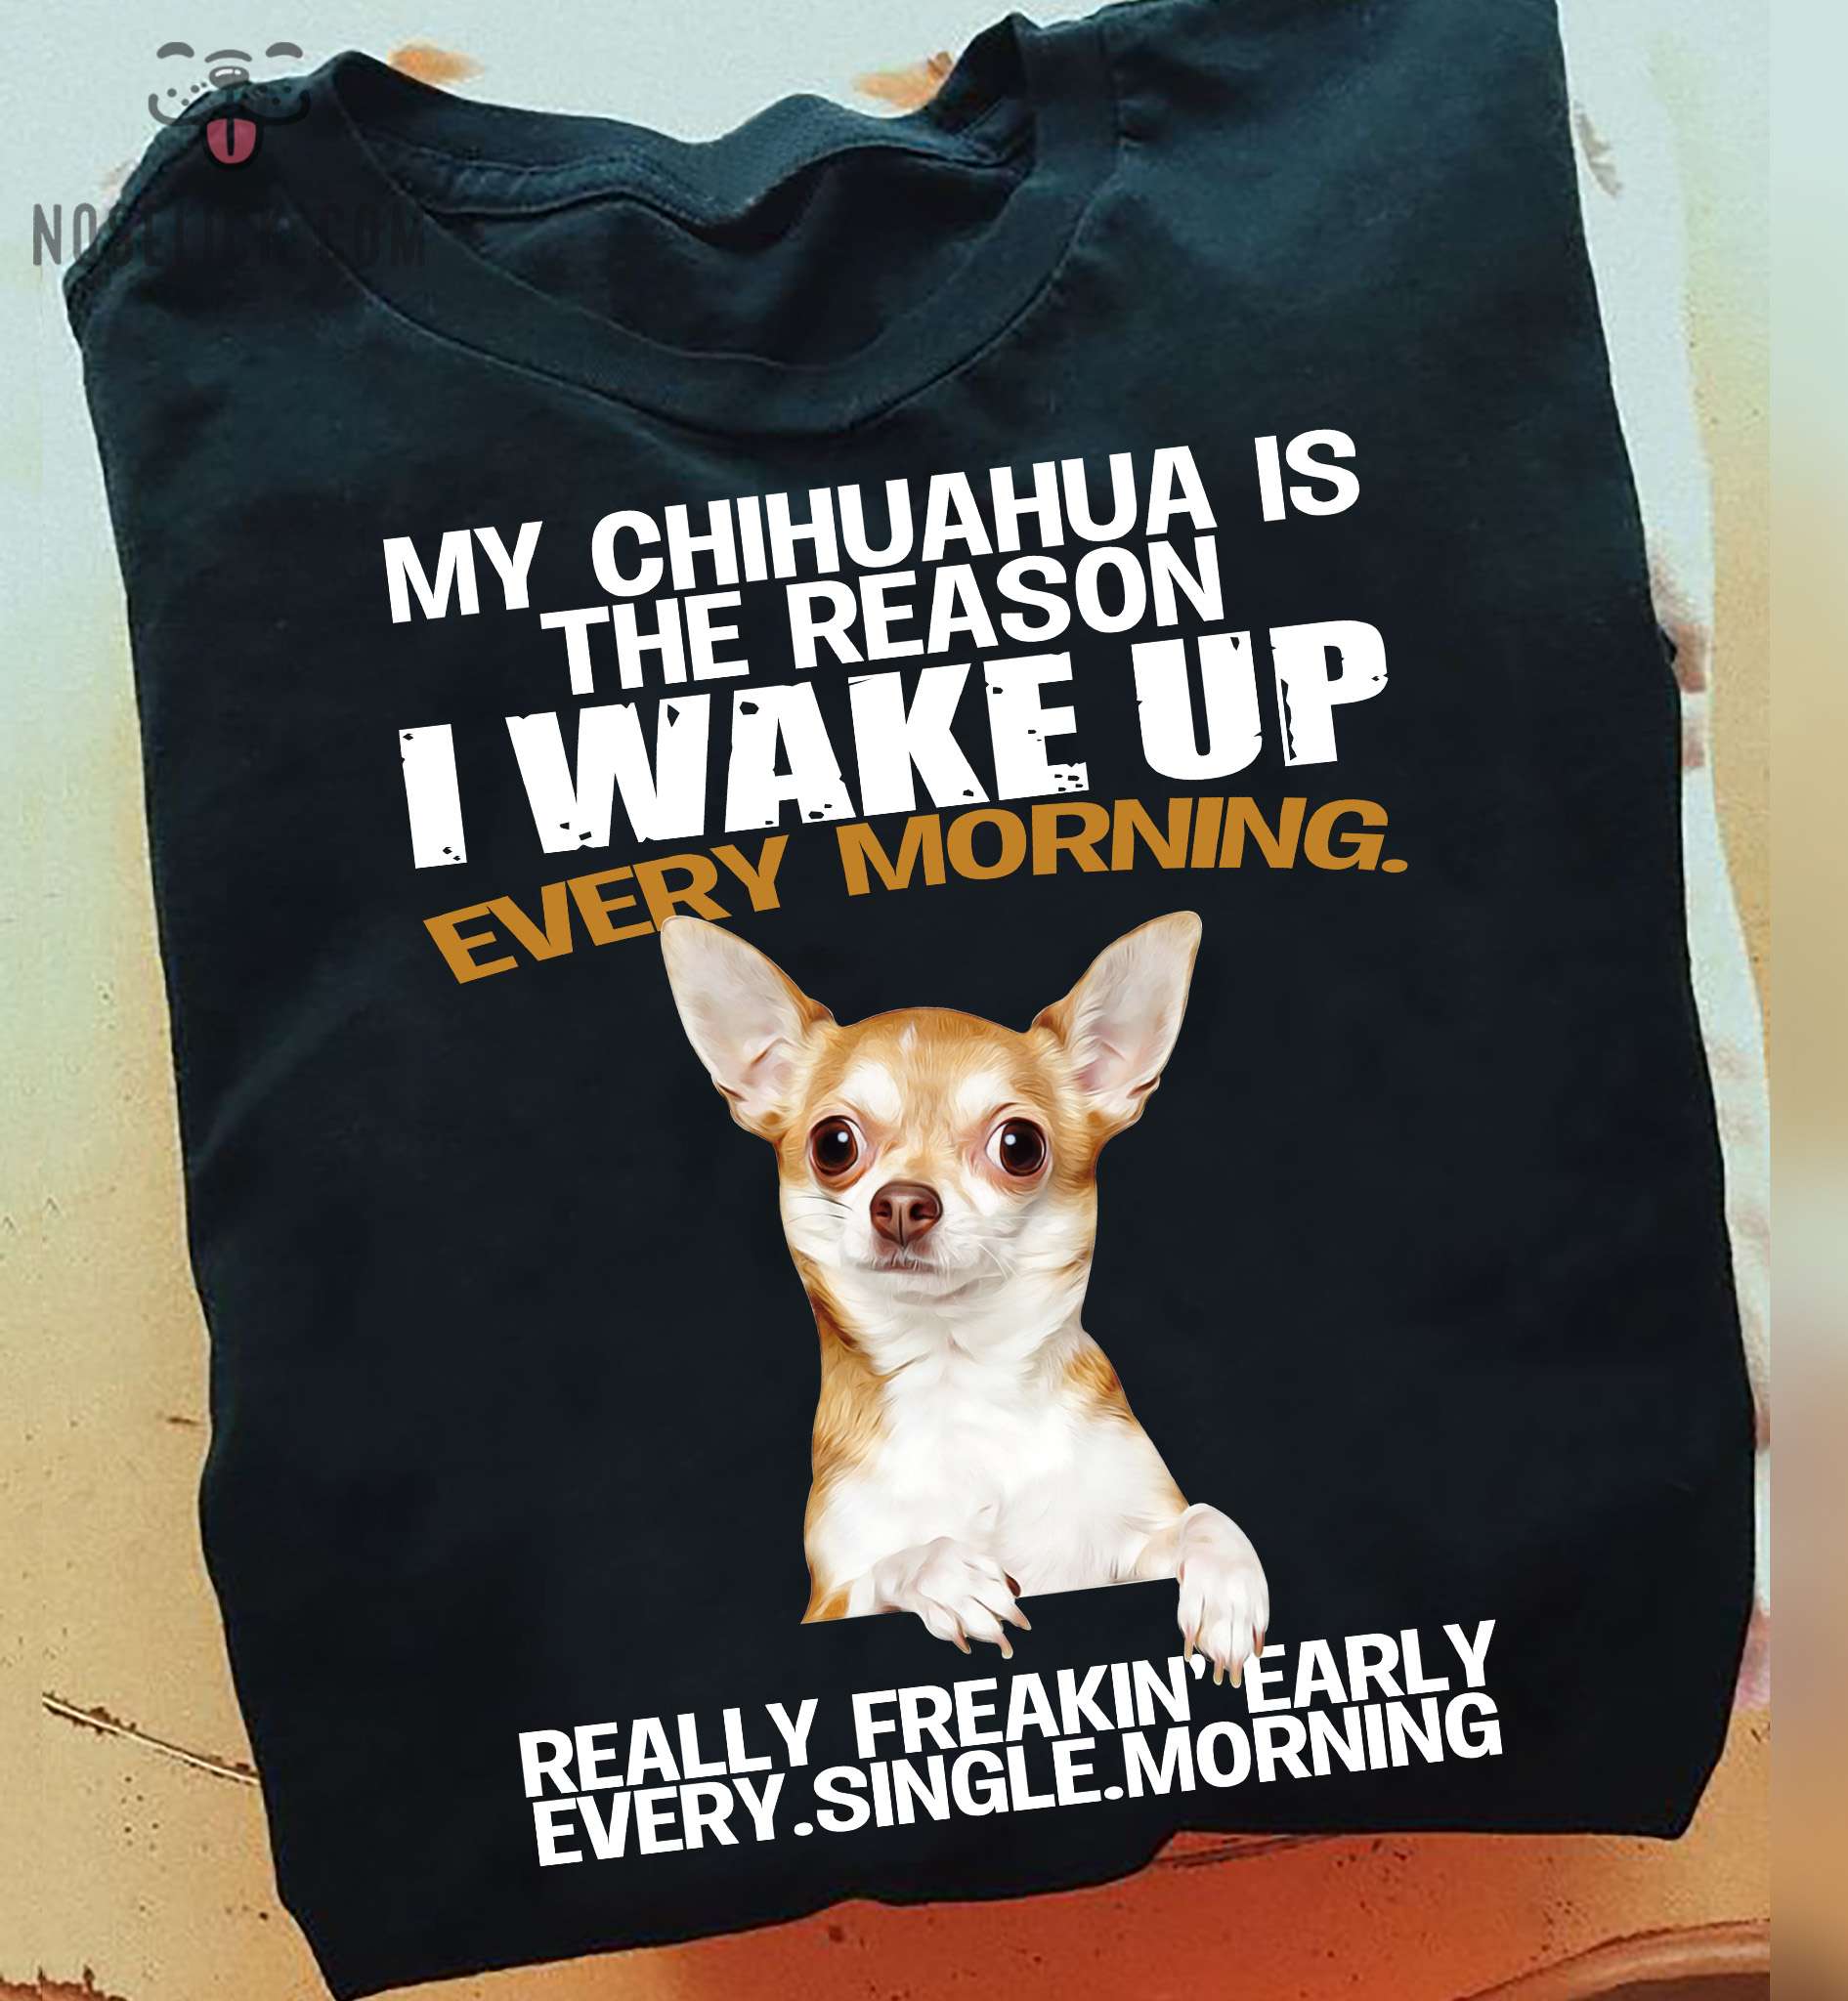 My chihuahua is the reason I wake up every morning - Gorgeous chihuahua dog, gift for dog lover